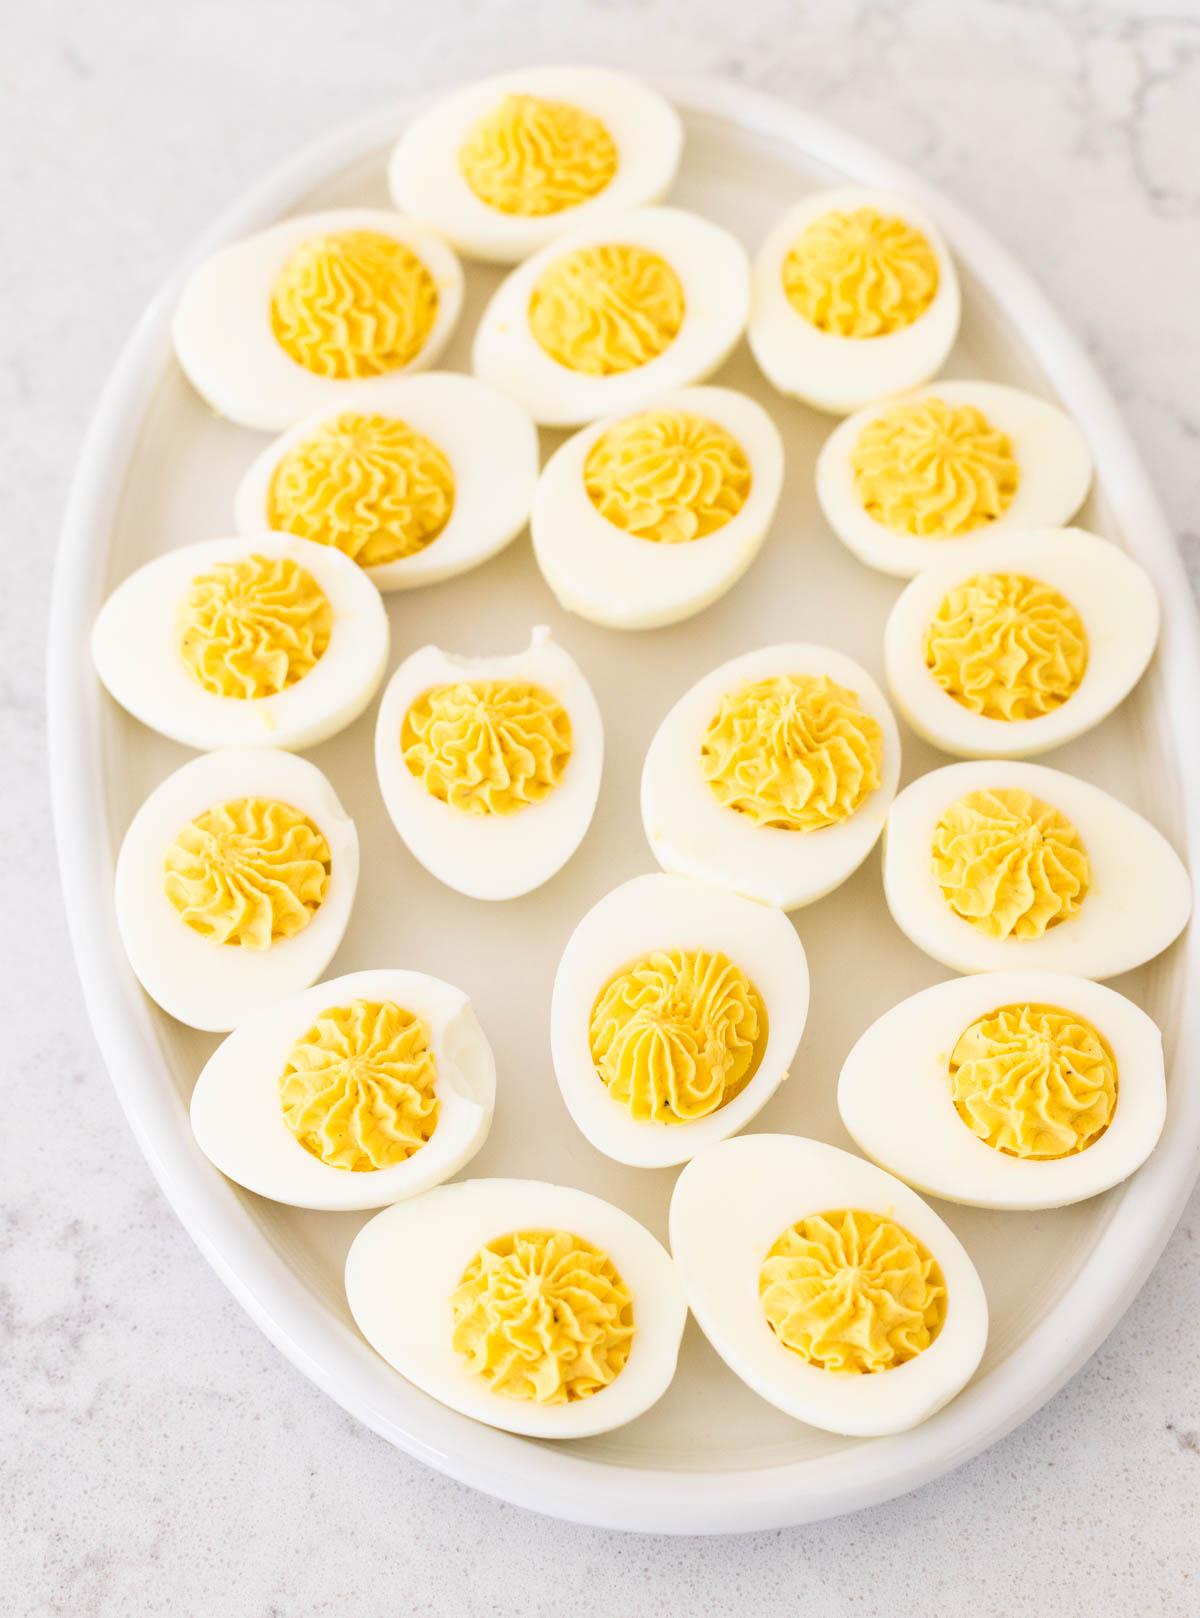 The egg whites have had the yolk filling piped into them and are on a white platter.